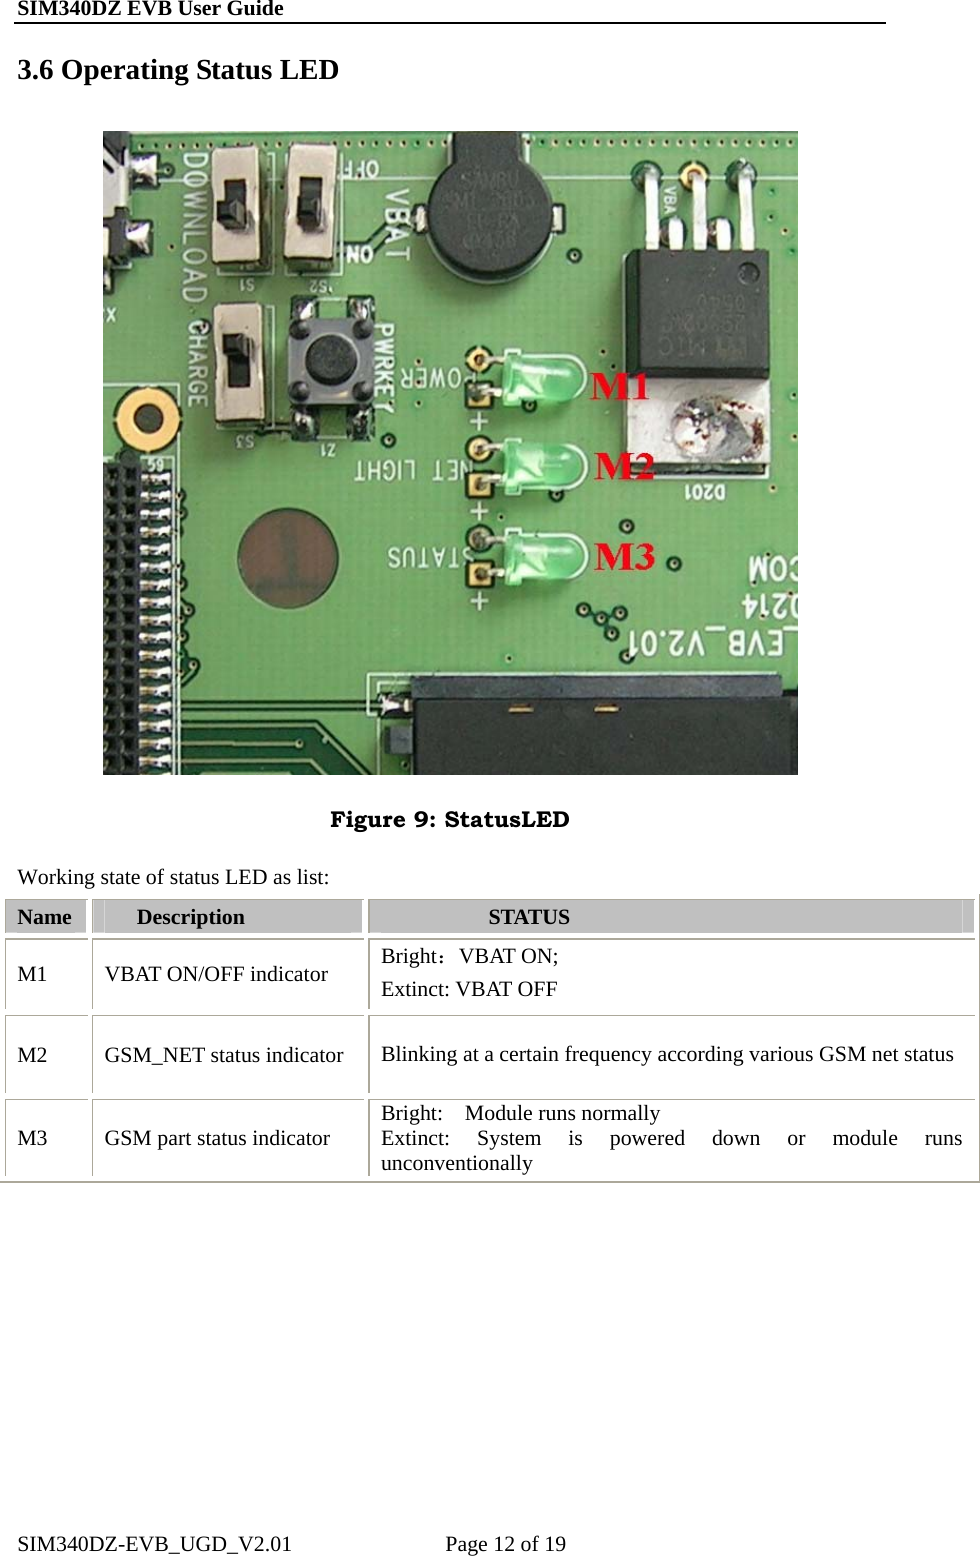 SIM340DZ EVB User Guide                                                       3.6 Operating Status LED  Figure 9: StatusLED Working state of status LED as list: Name  Description  STATUS M1  VBAT ON/OFF indicator    Bright：VBAT ON; Extinct: VBAT OFF M2 GSM_NET status indicator  Blinking at a certain frequency according various GSM net status M3  GSM part status indicator  Bright:  Module runs normally Extinct: System is powered down or module runs unconventionally  SIM340DZ-EVB_UGD_V2.01              Page 12 of 19 